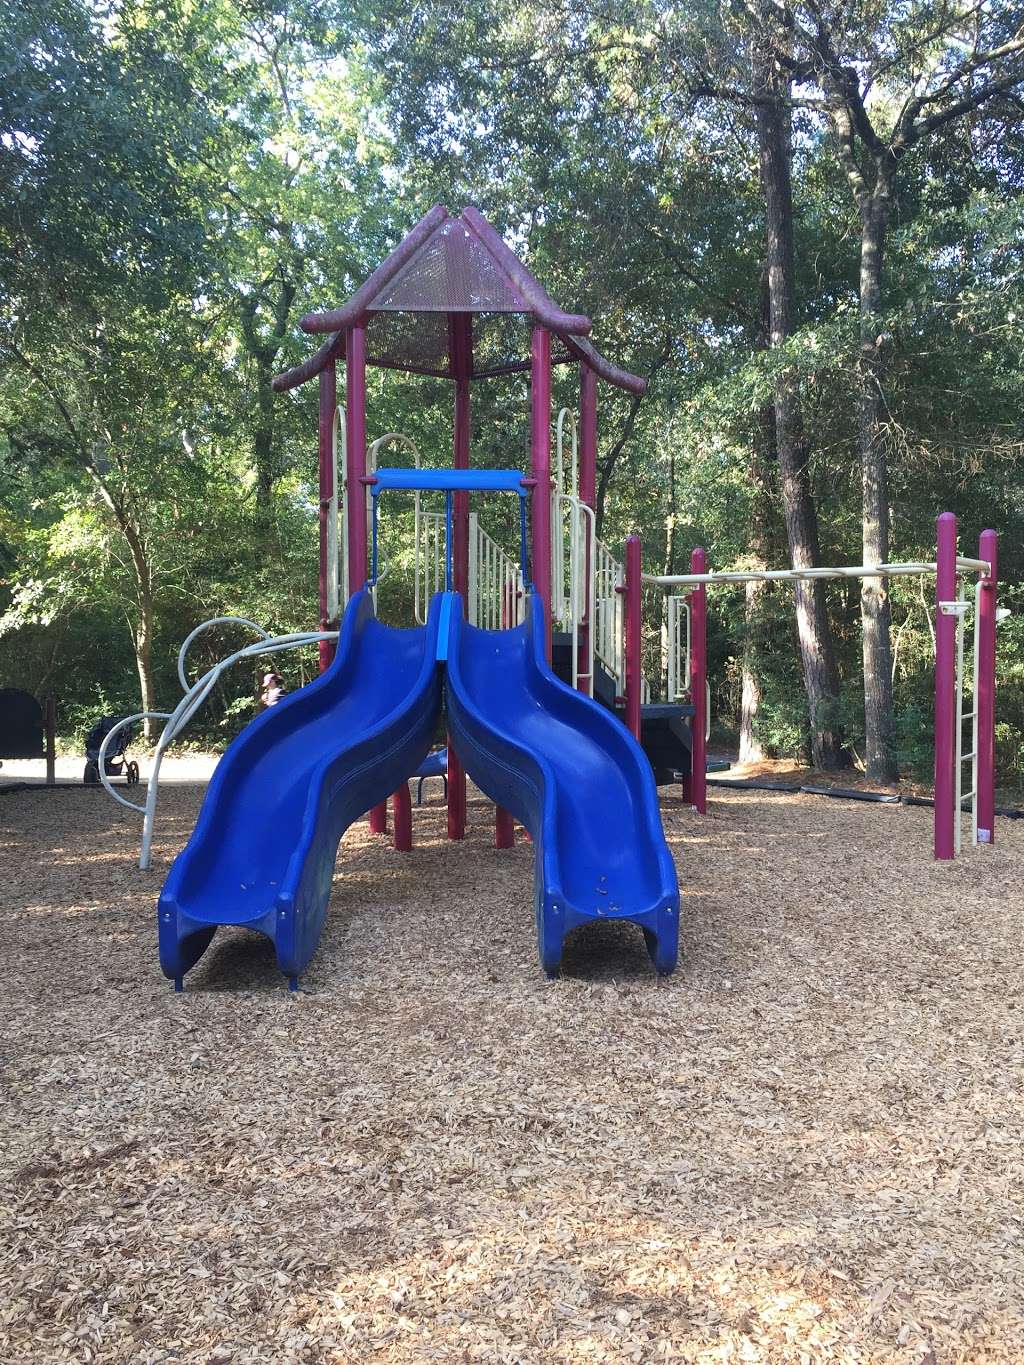 Loggers Hollow Park | 1901 S Millbend Dr, The Woodlands, TX 77380 | Phone: (281) 210-3800